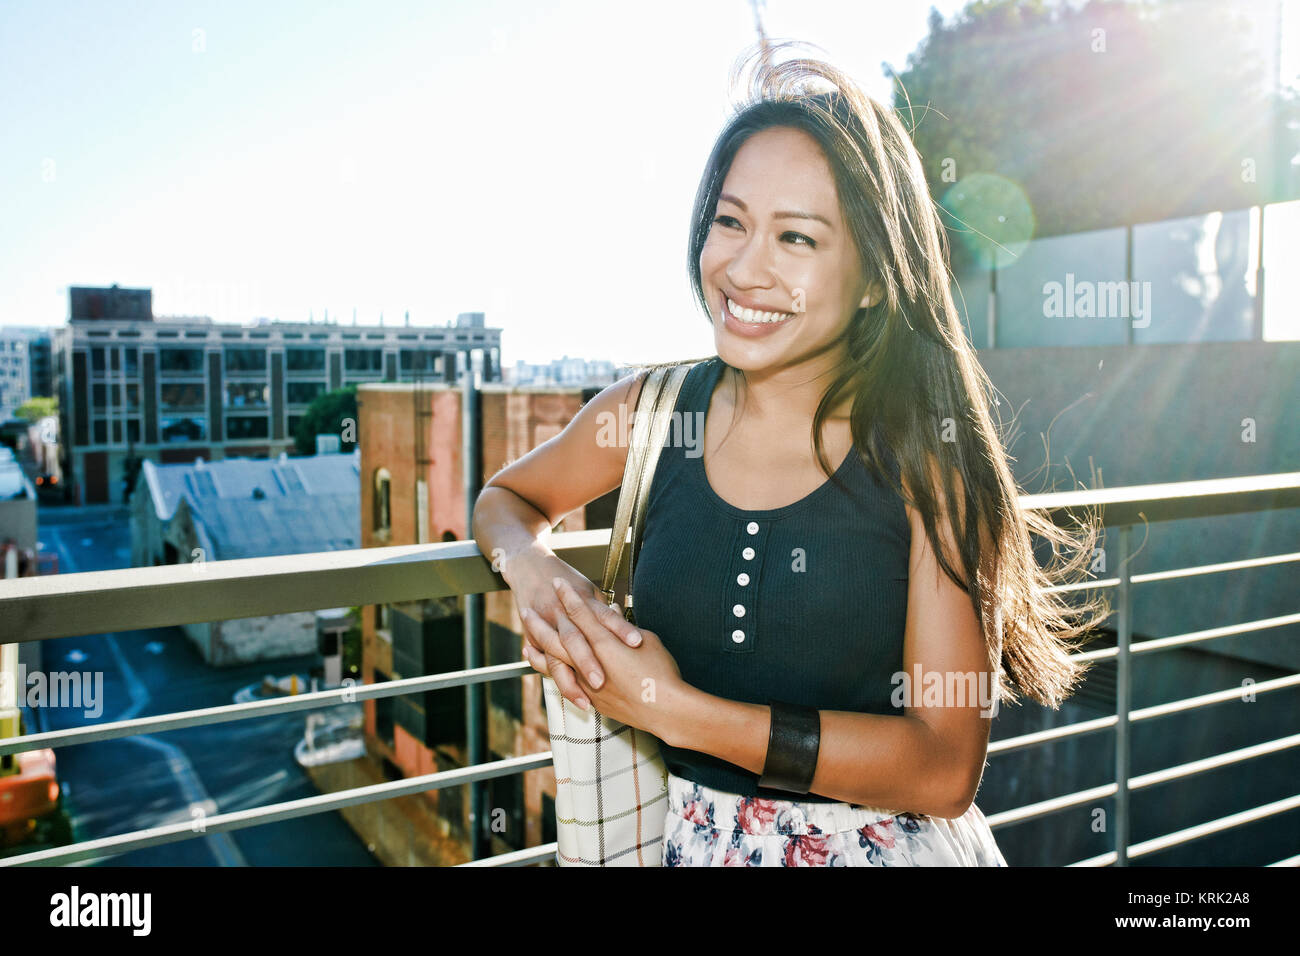 Smiling Asian woman leaning on rooftop Banque D'Images